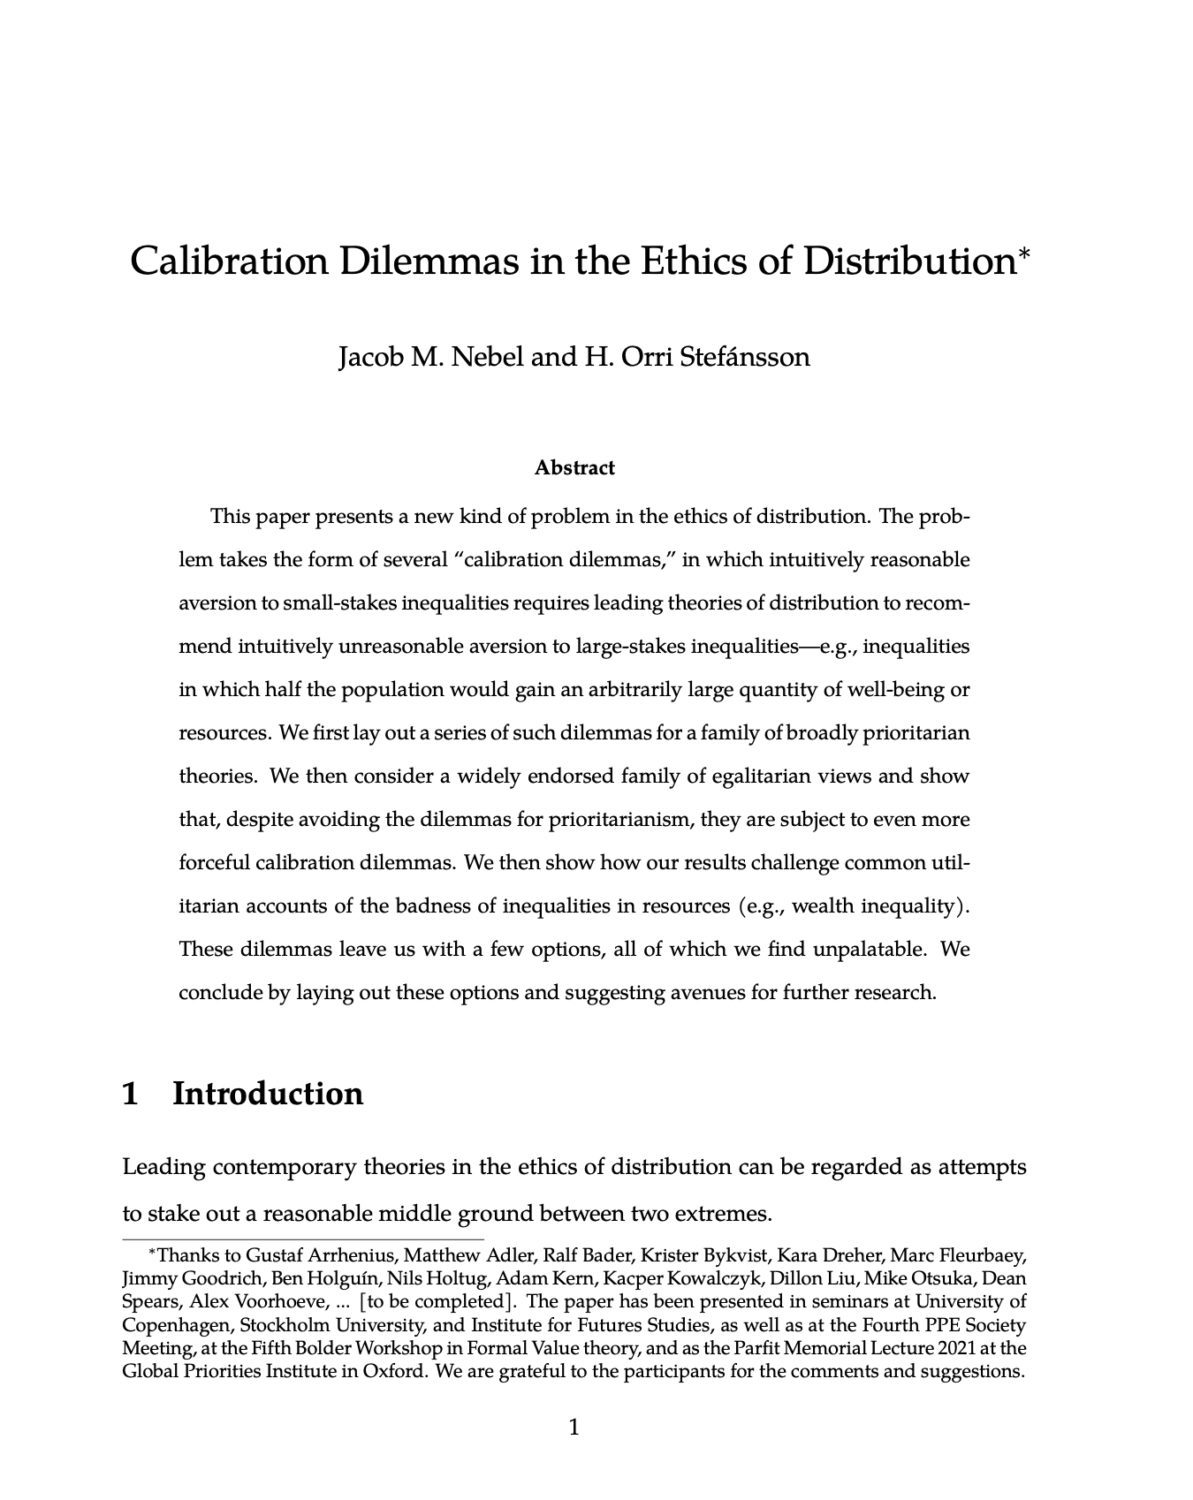 Nebel-Stefansson - Calibration dilemmas in the ethics of distribution cover